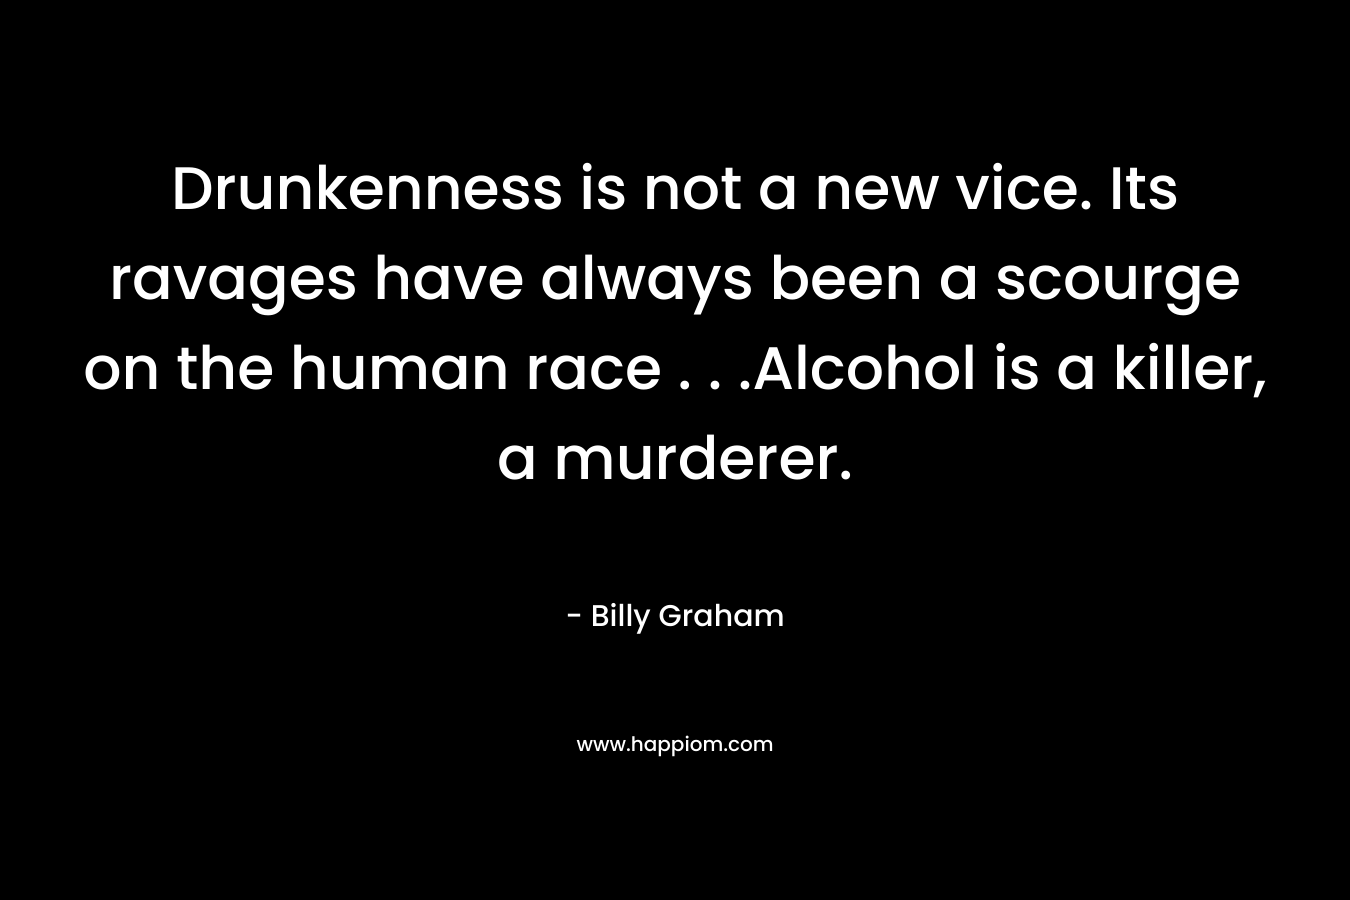 Drunkenness is not a new vice. Its ravages have always been a scourge on the human race . . .Alcohol is a killer, a murderer.